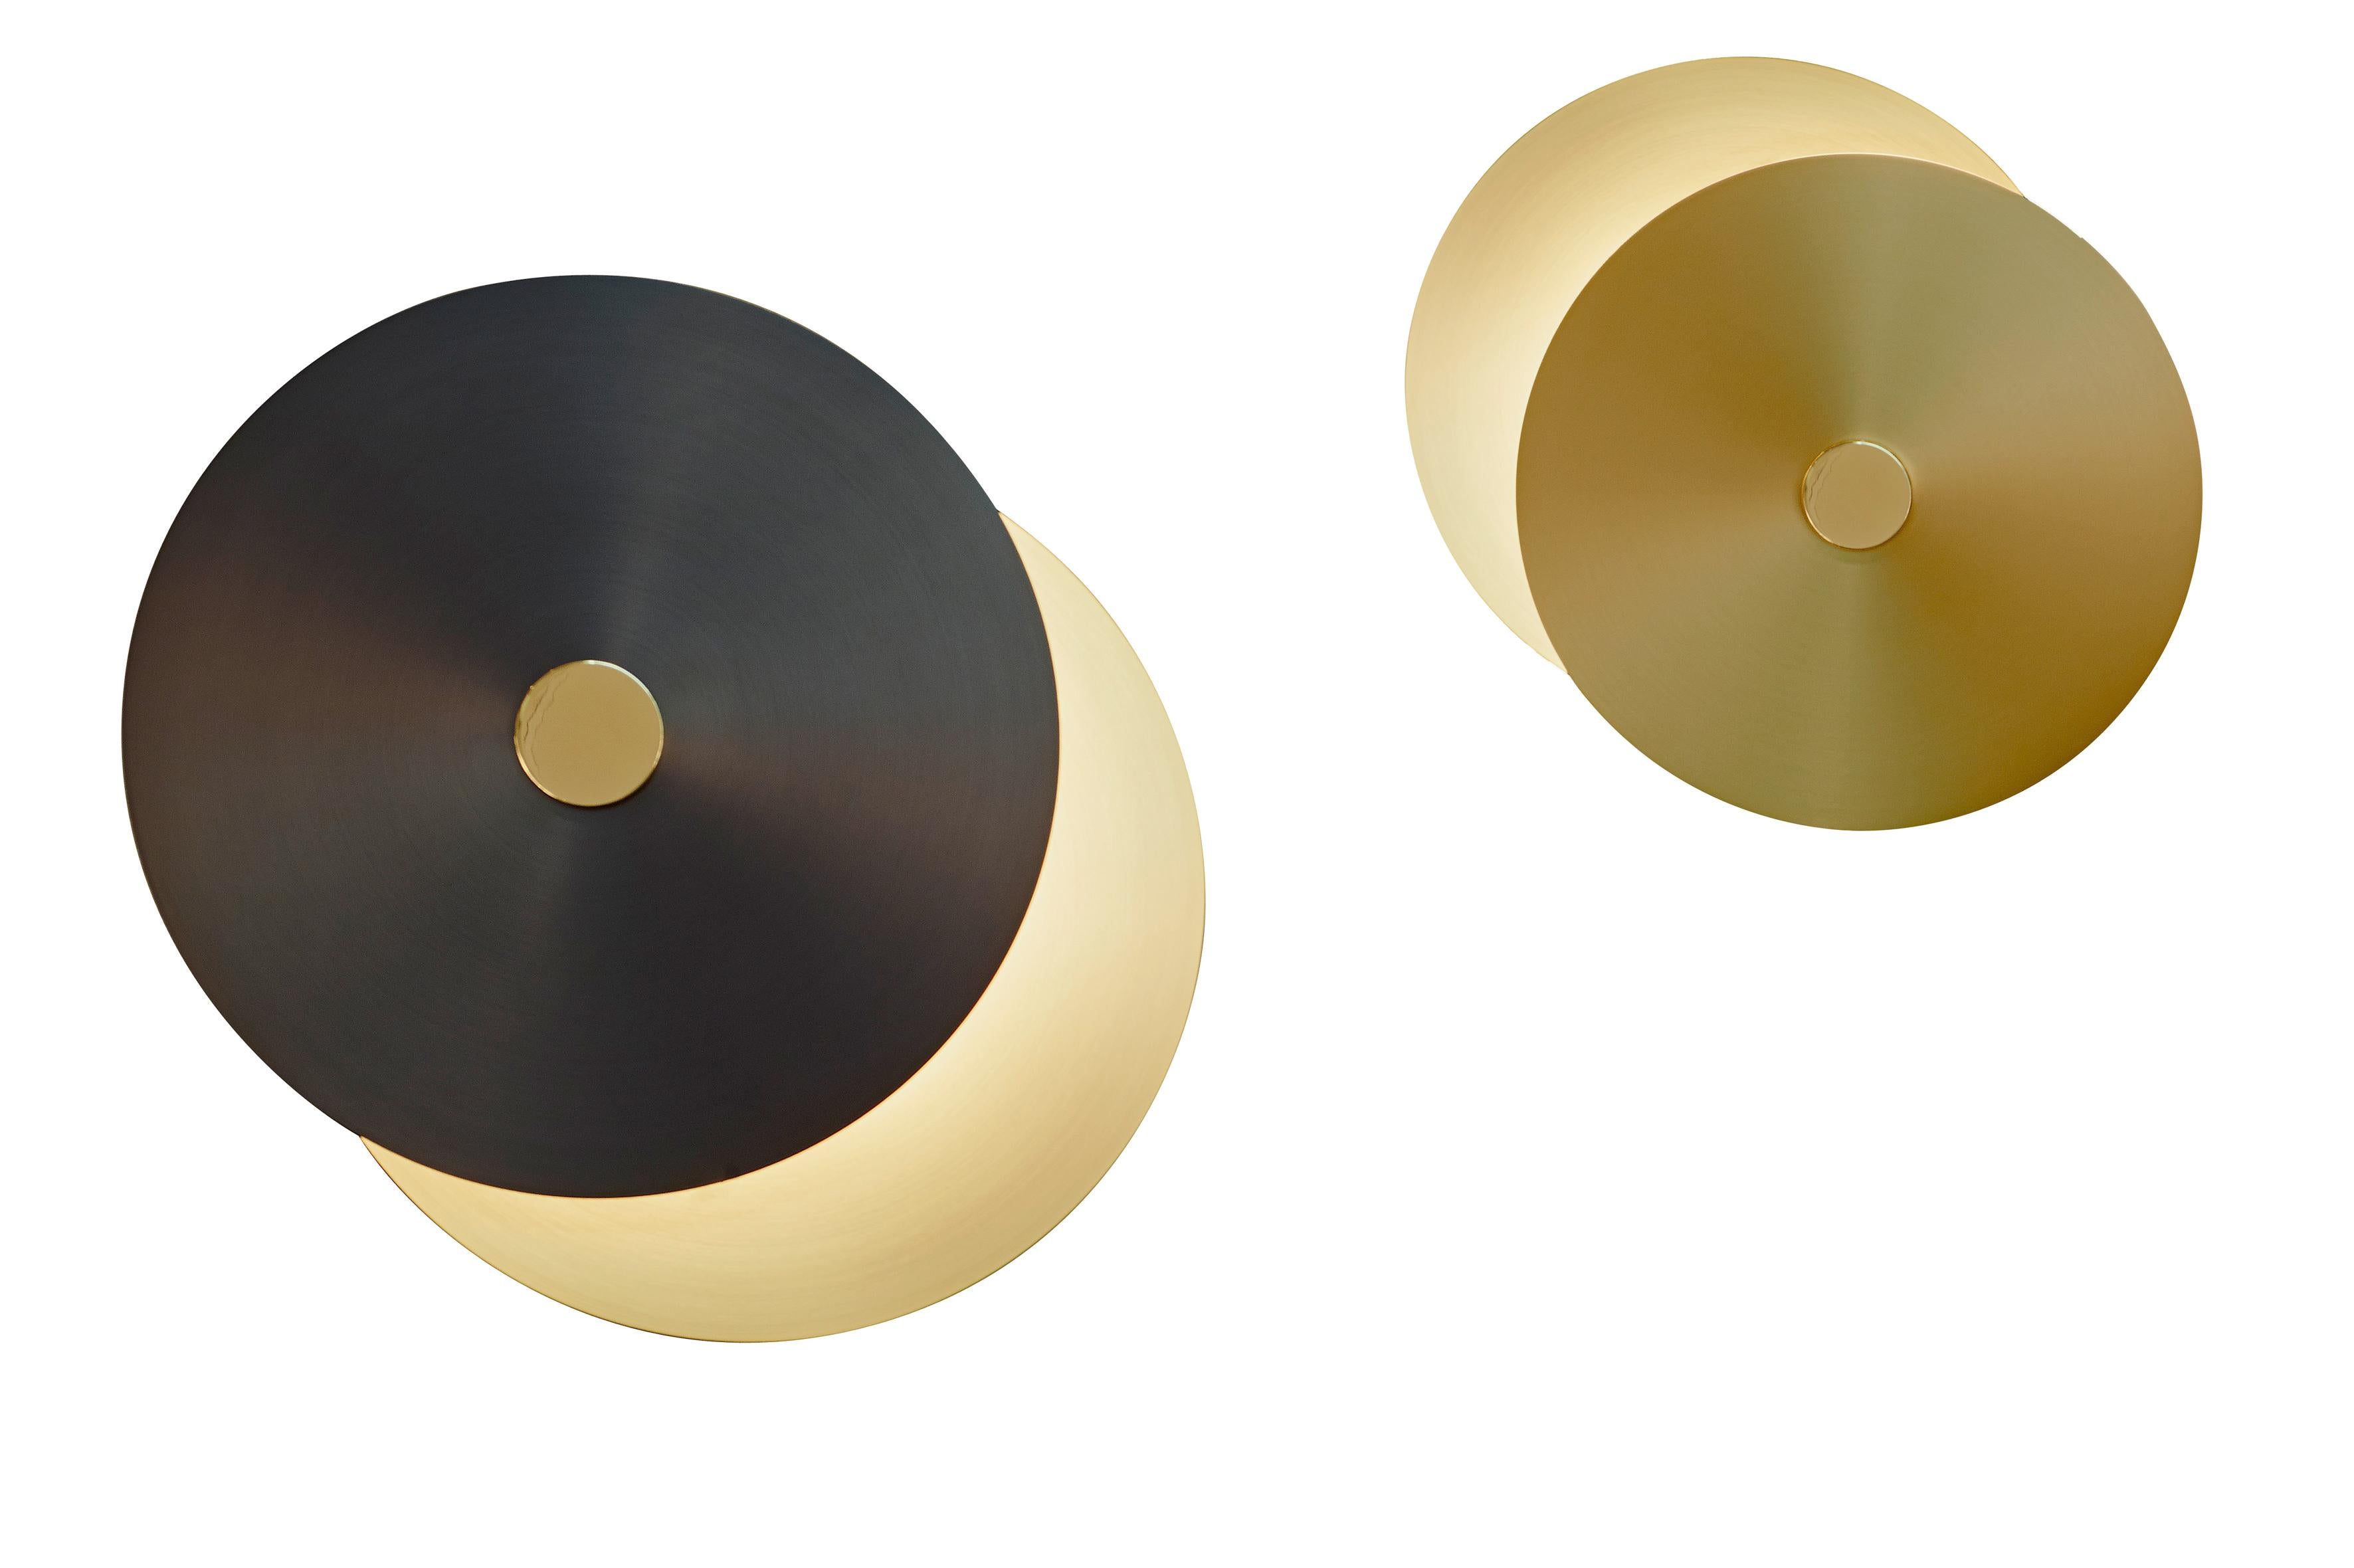 Set of 2 Eclipse XS and XL wall lights by Hervé Langlais
Dimensions: D 46 x W 6.8 x H 38 cm and D 34 x W 6.8 x H 28 cm
Materials: solid brass.
Others finishes are available.

All our lamps can be wired according to each country. If sold to the